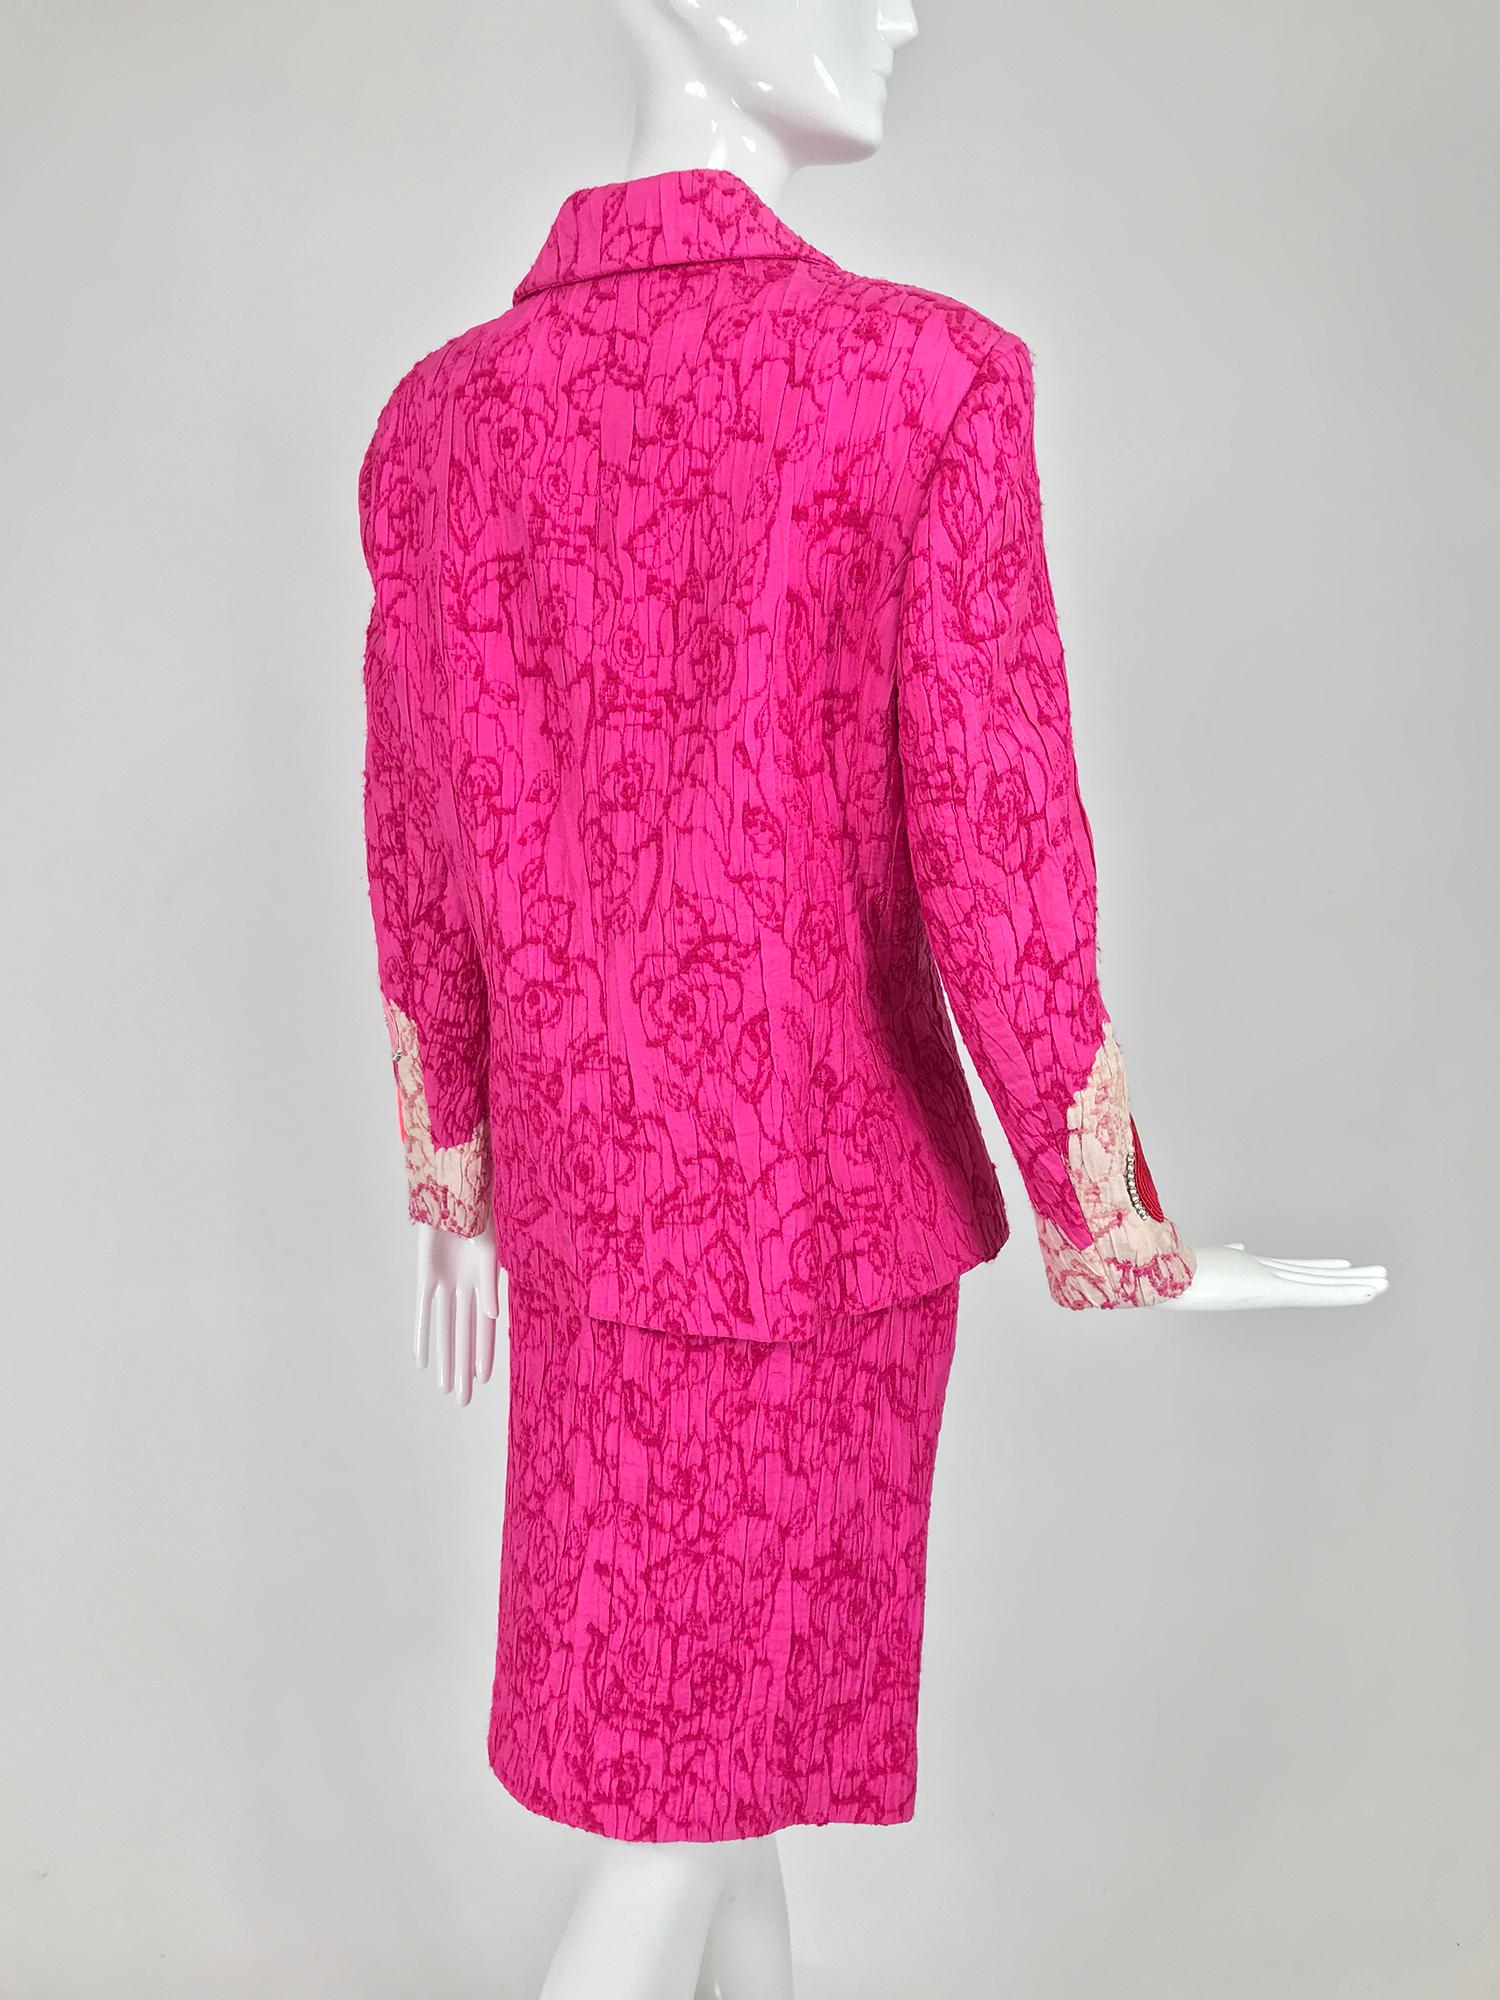 Christian Lacroix Pink Embroidered Silk Applique Skirt Suit 1990s For Sale 3